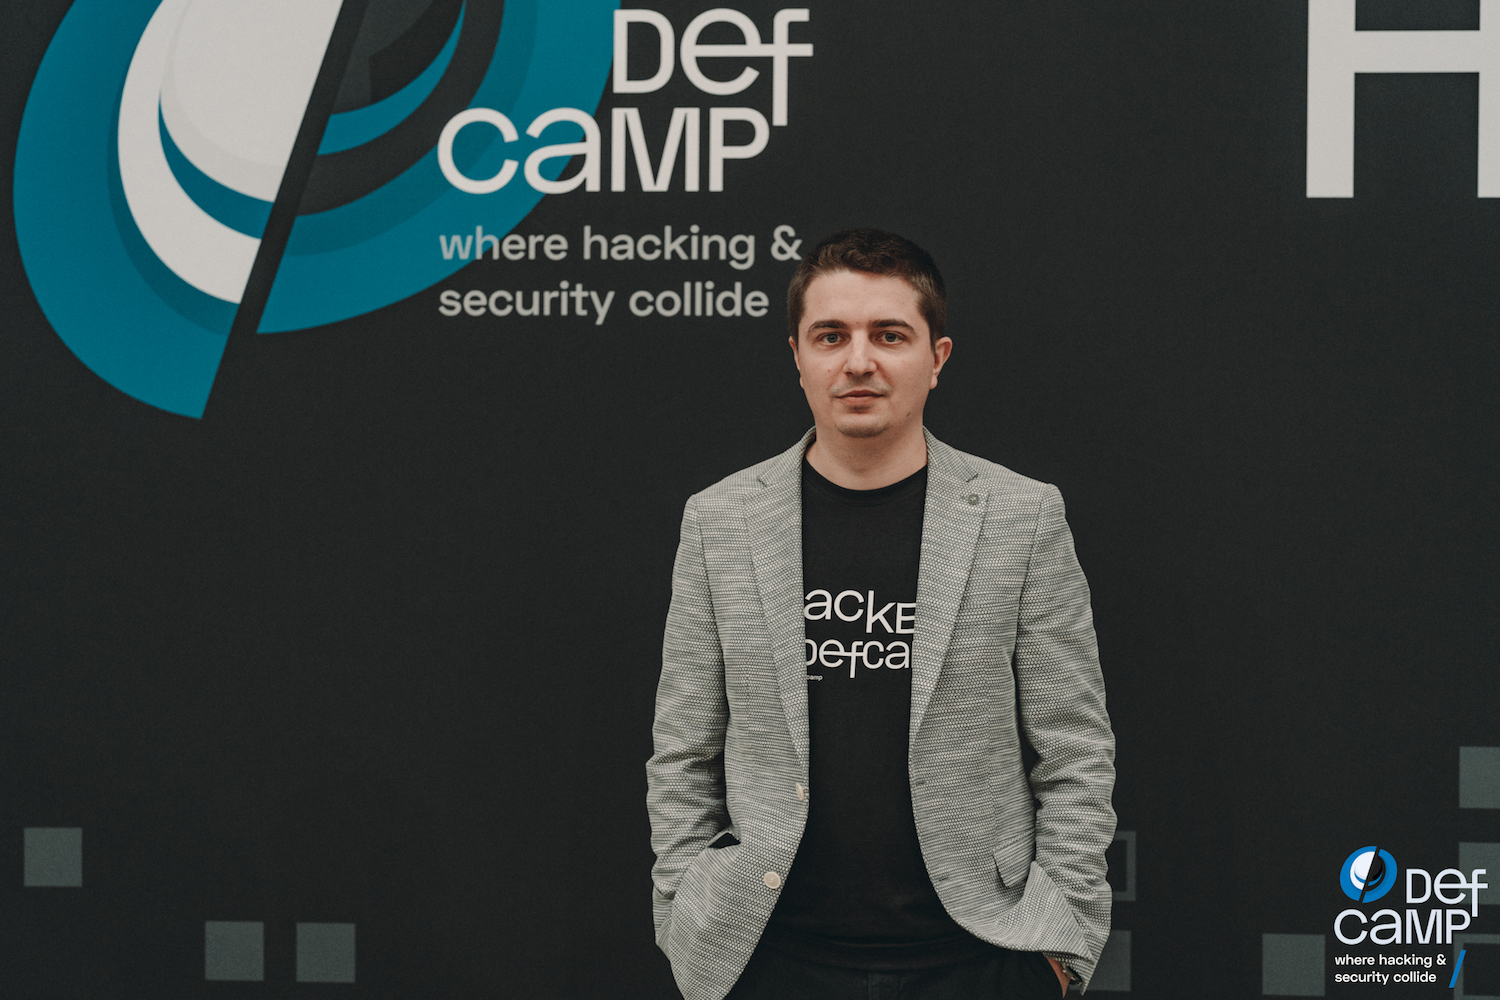 DefCamp, the largest cybersecurity conference in Central and Eastern Europe, expands with a first spin-off edition in Cluj-Napoca, May 16-17